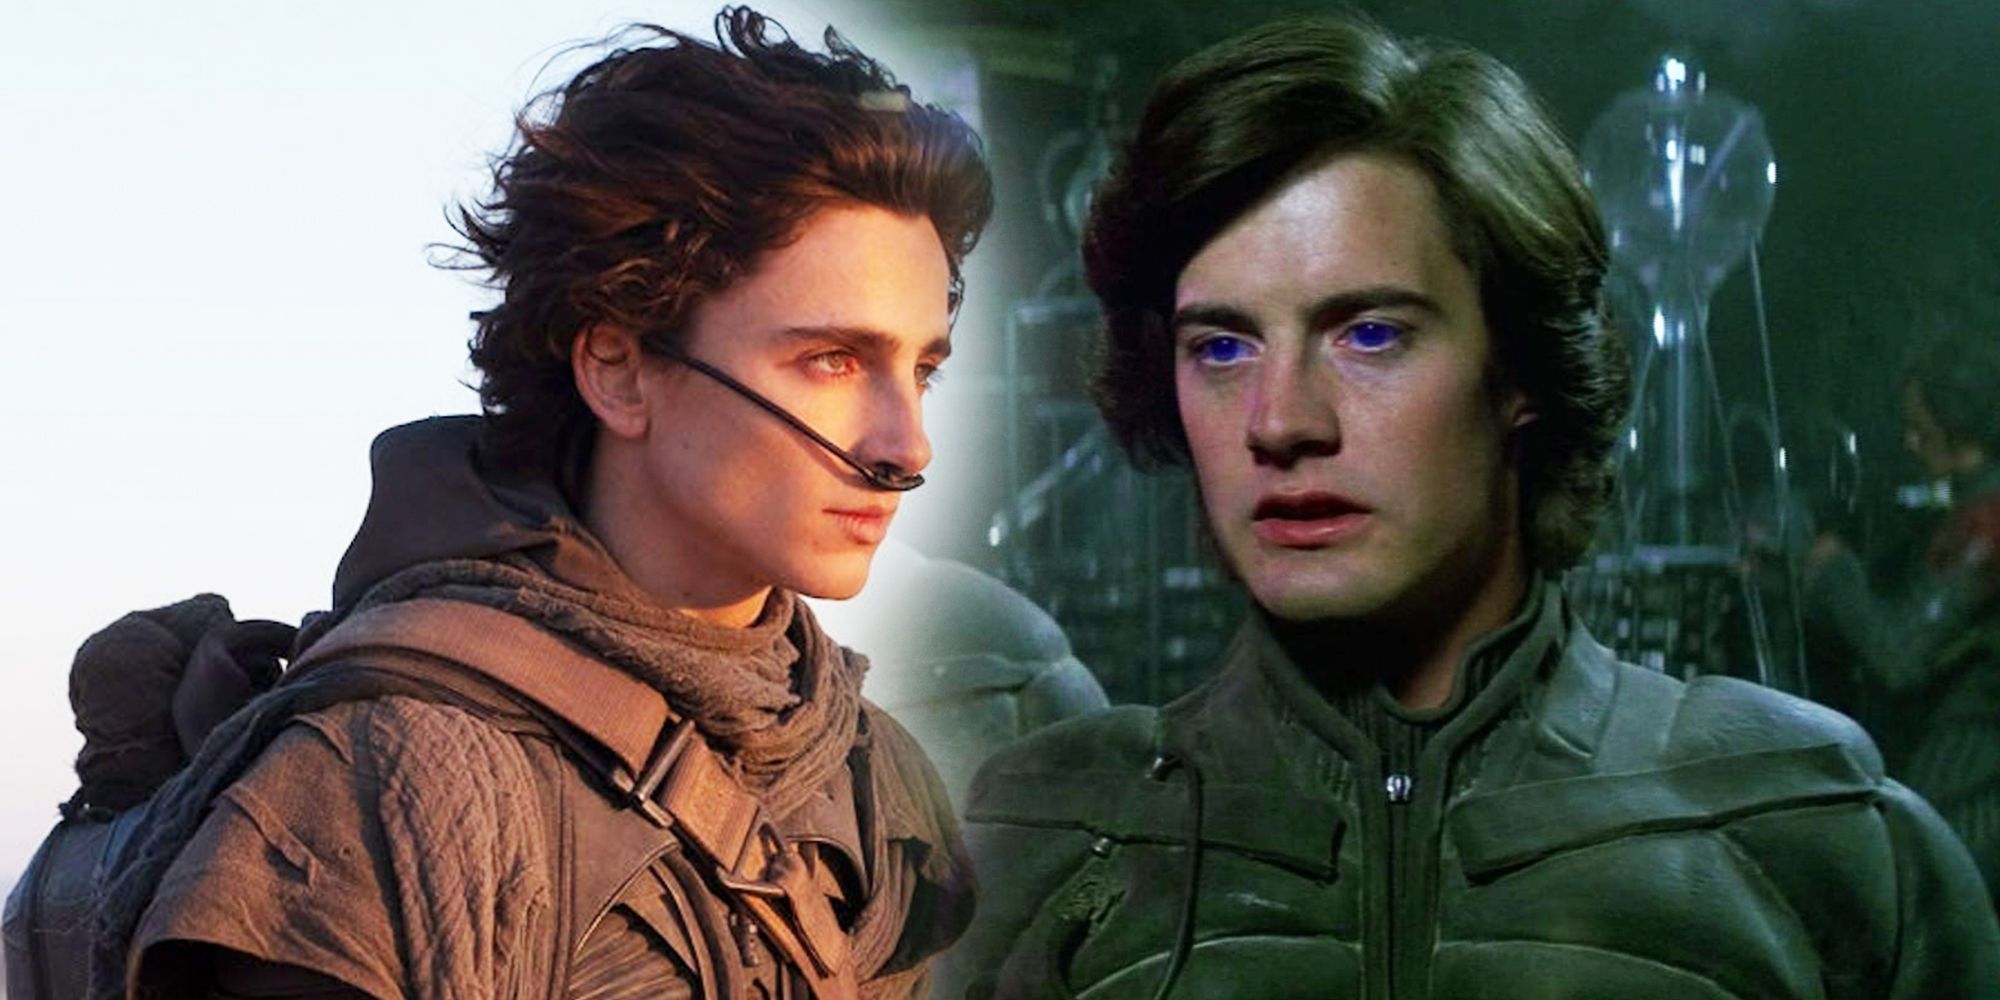 Timothee Chalamet and Kyle MacLachlan as Paul Atreides in Dune 2020 and Dune 1984